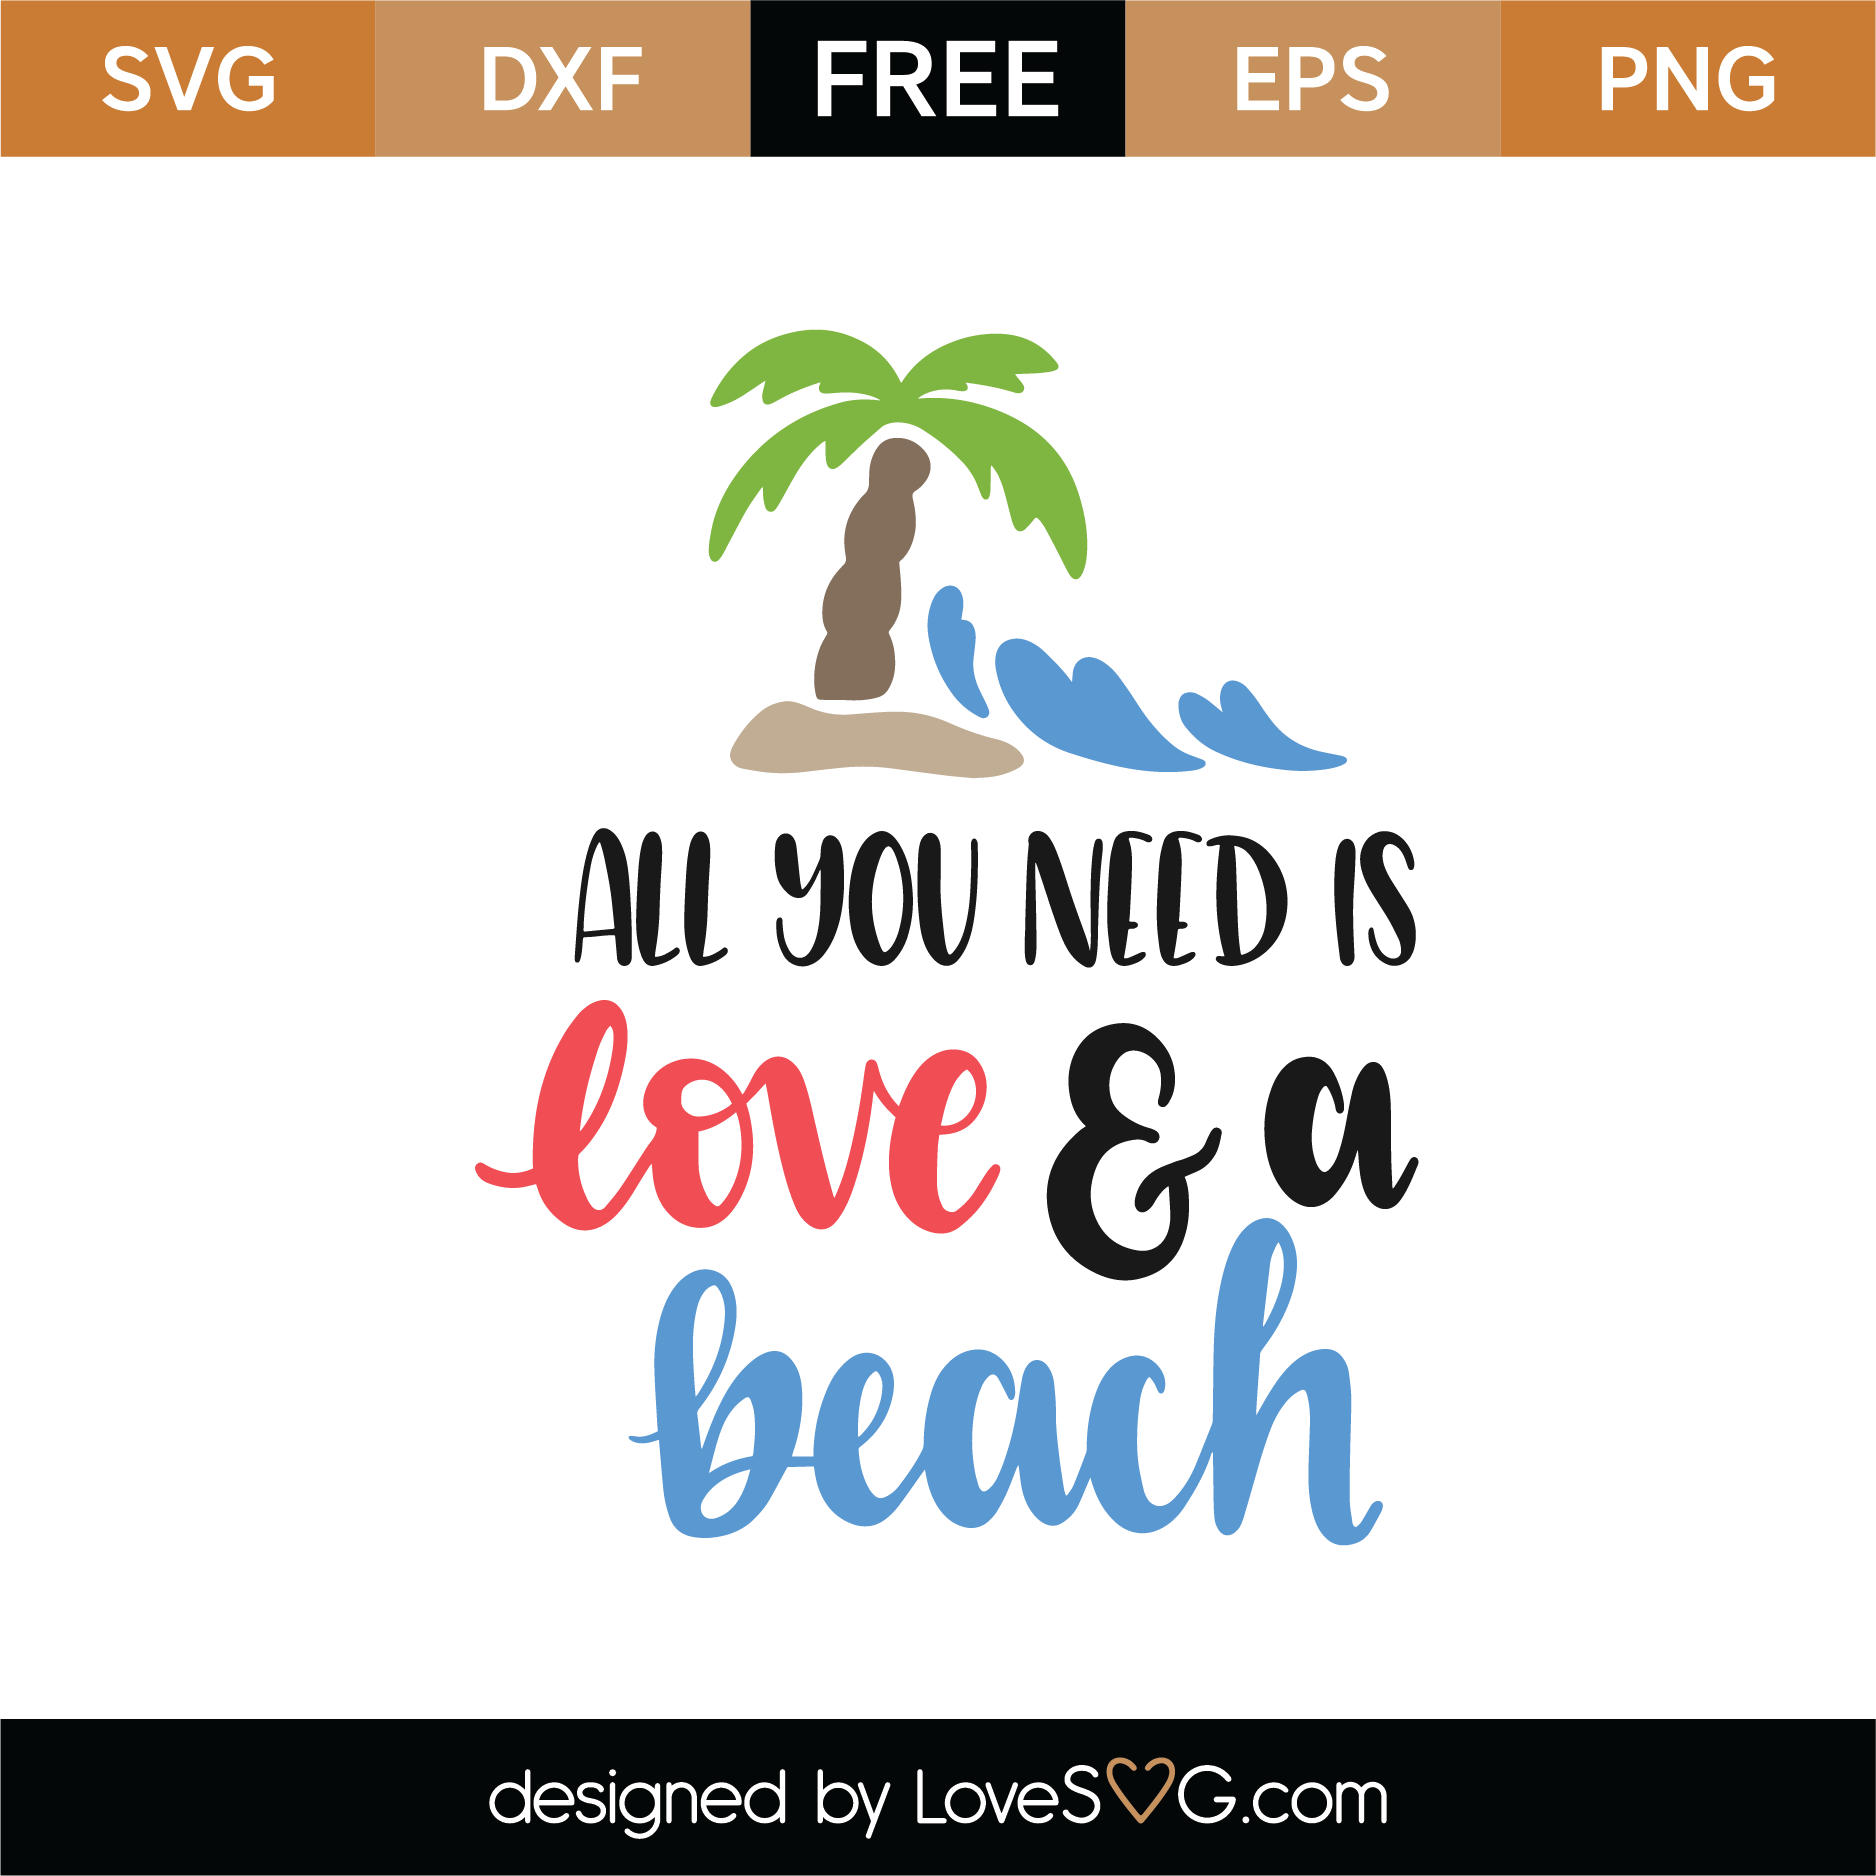 Download Free All You Need is Love And A Beach SVG Cut File ...